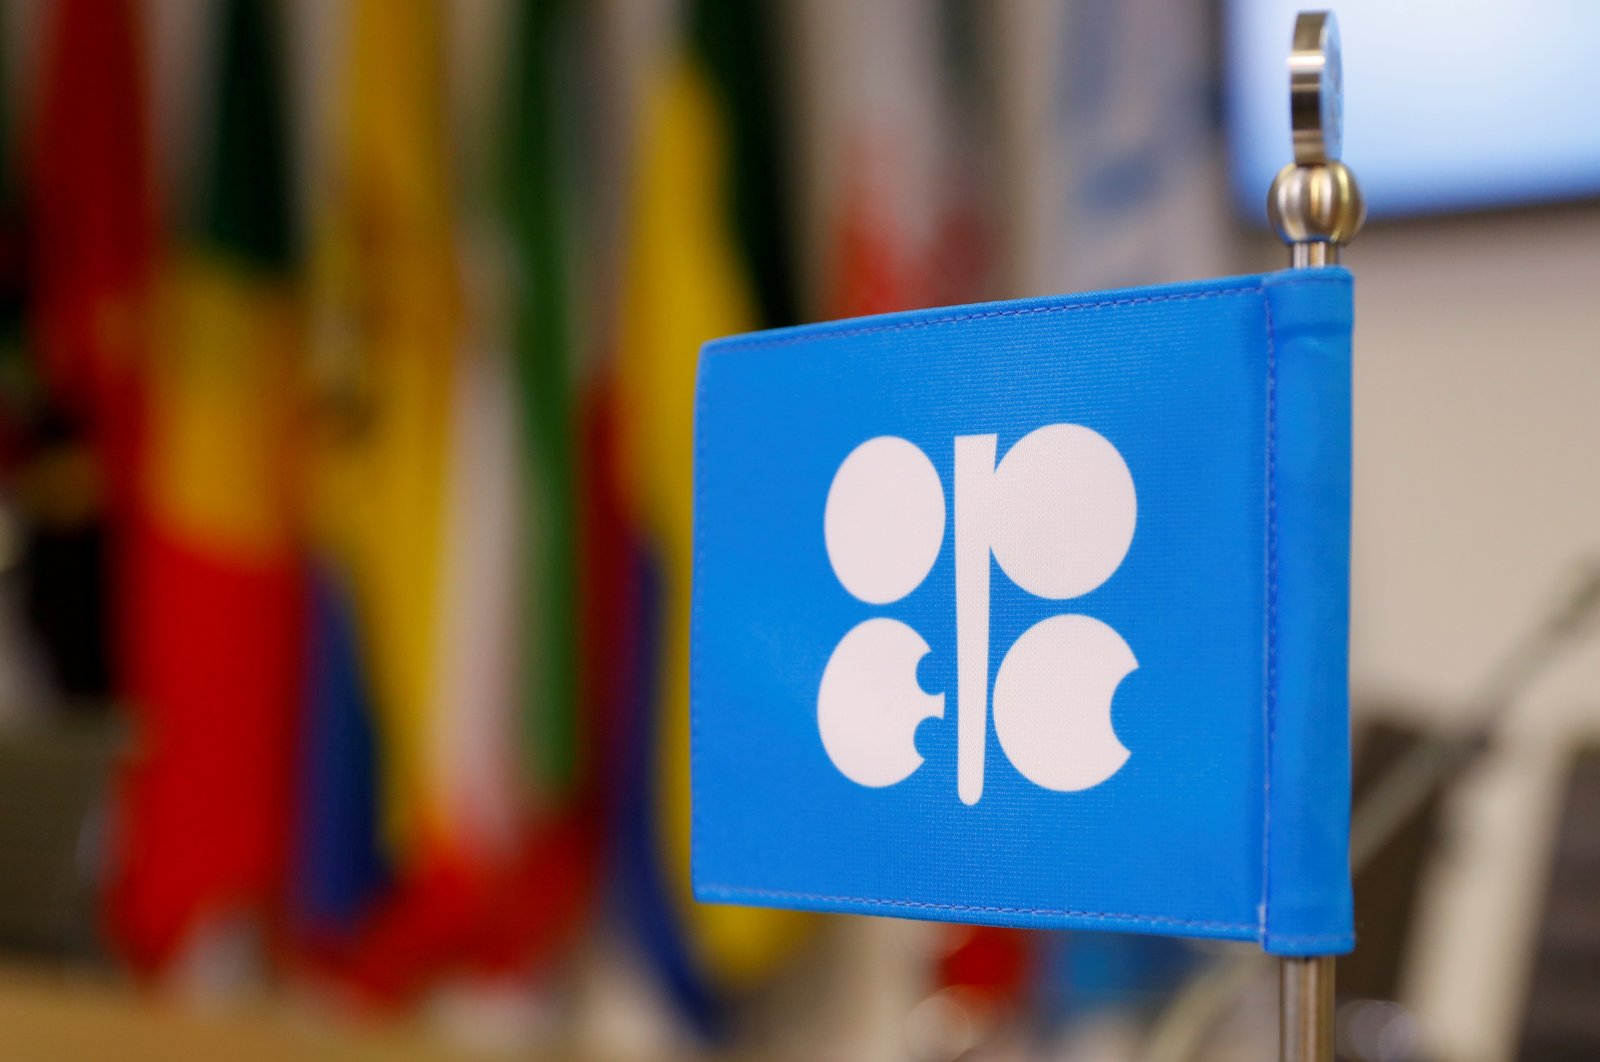 The logo of the Organization of the Petroleum Exporting Countries (OPEC) on a flag at the oil producer group's headquarters in Vienna, Austria, Dec. 7, 2018. (Reuters Photo)